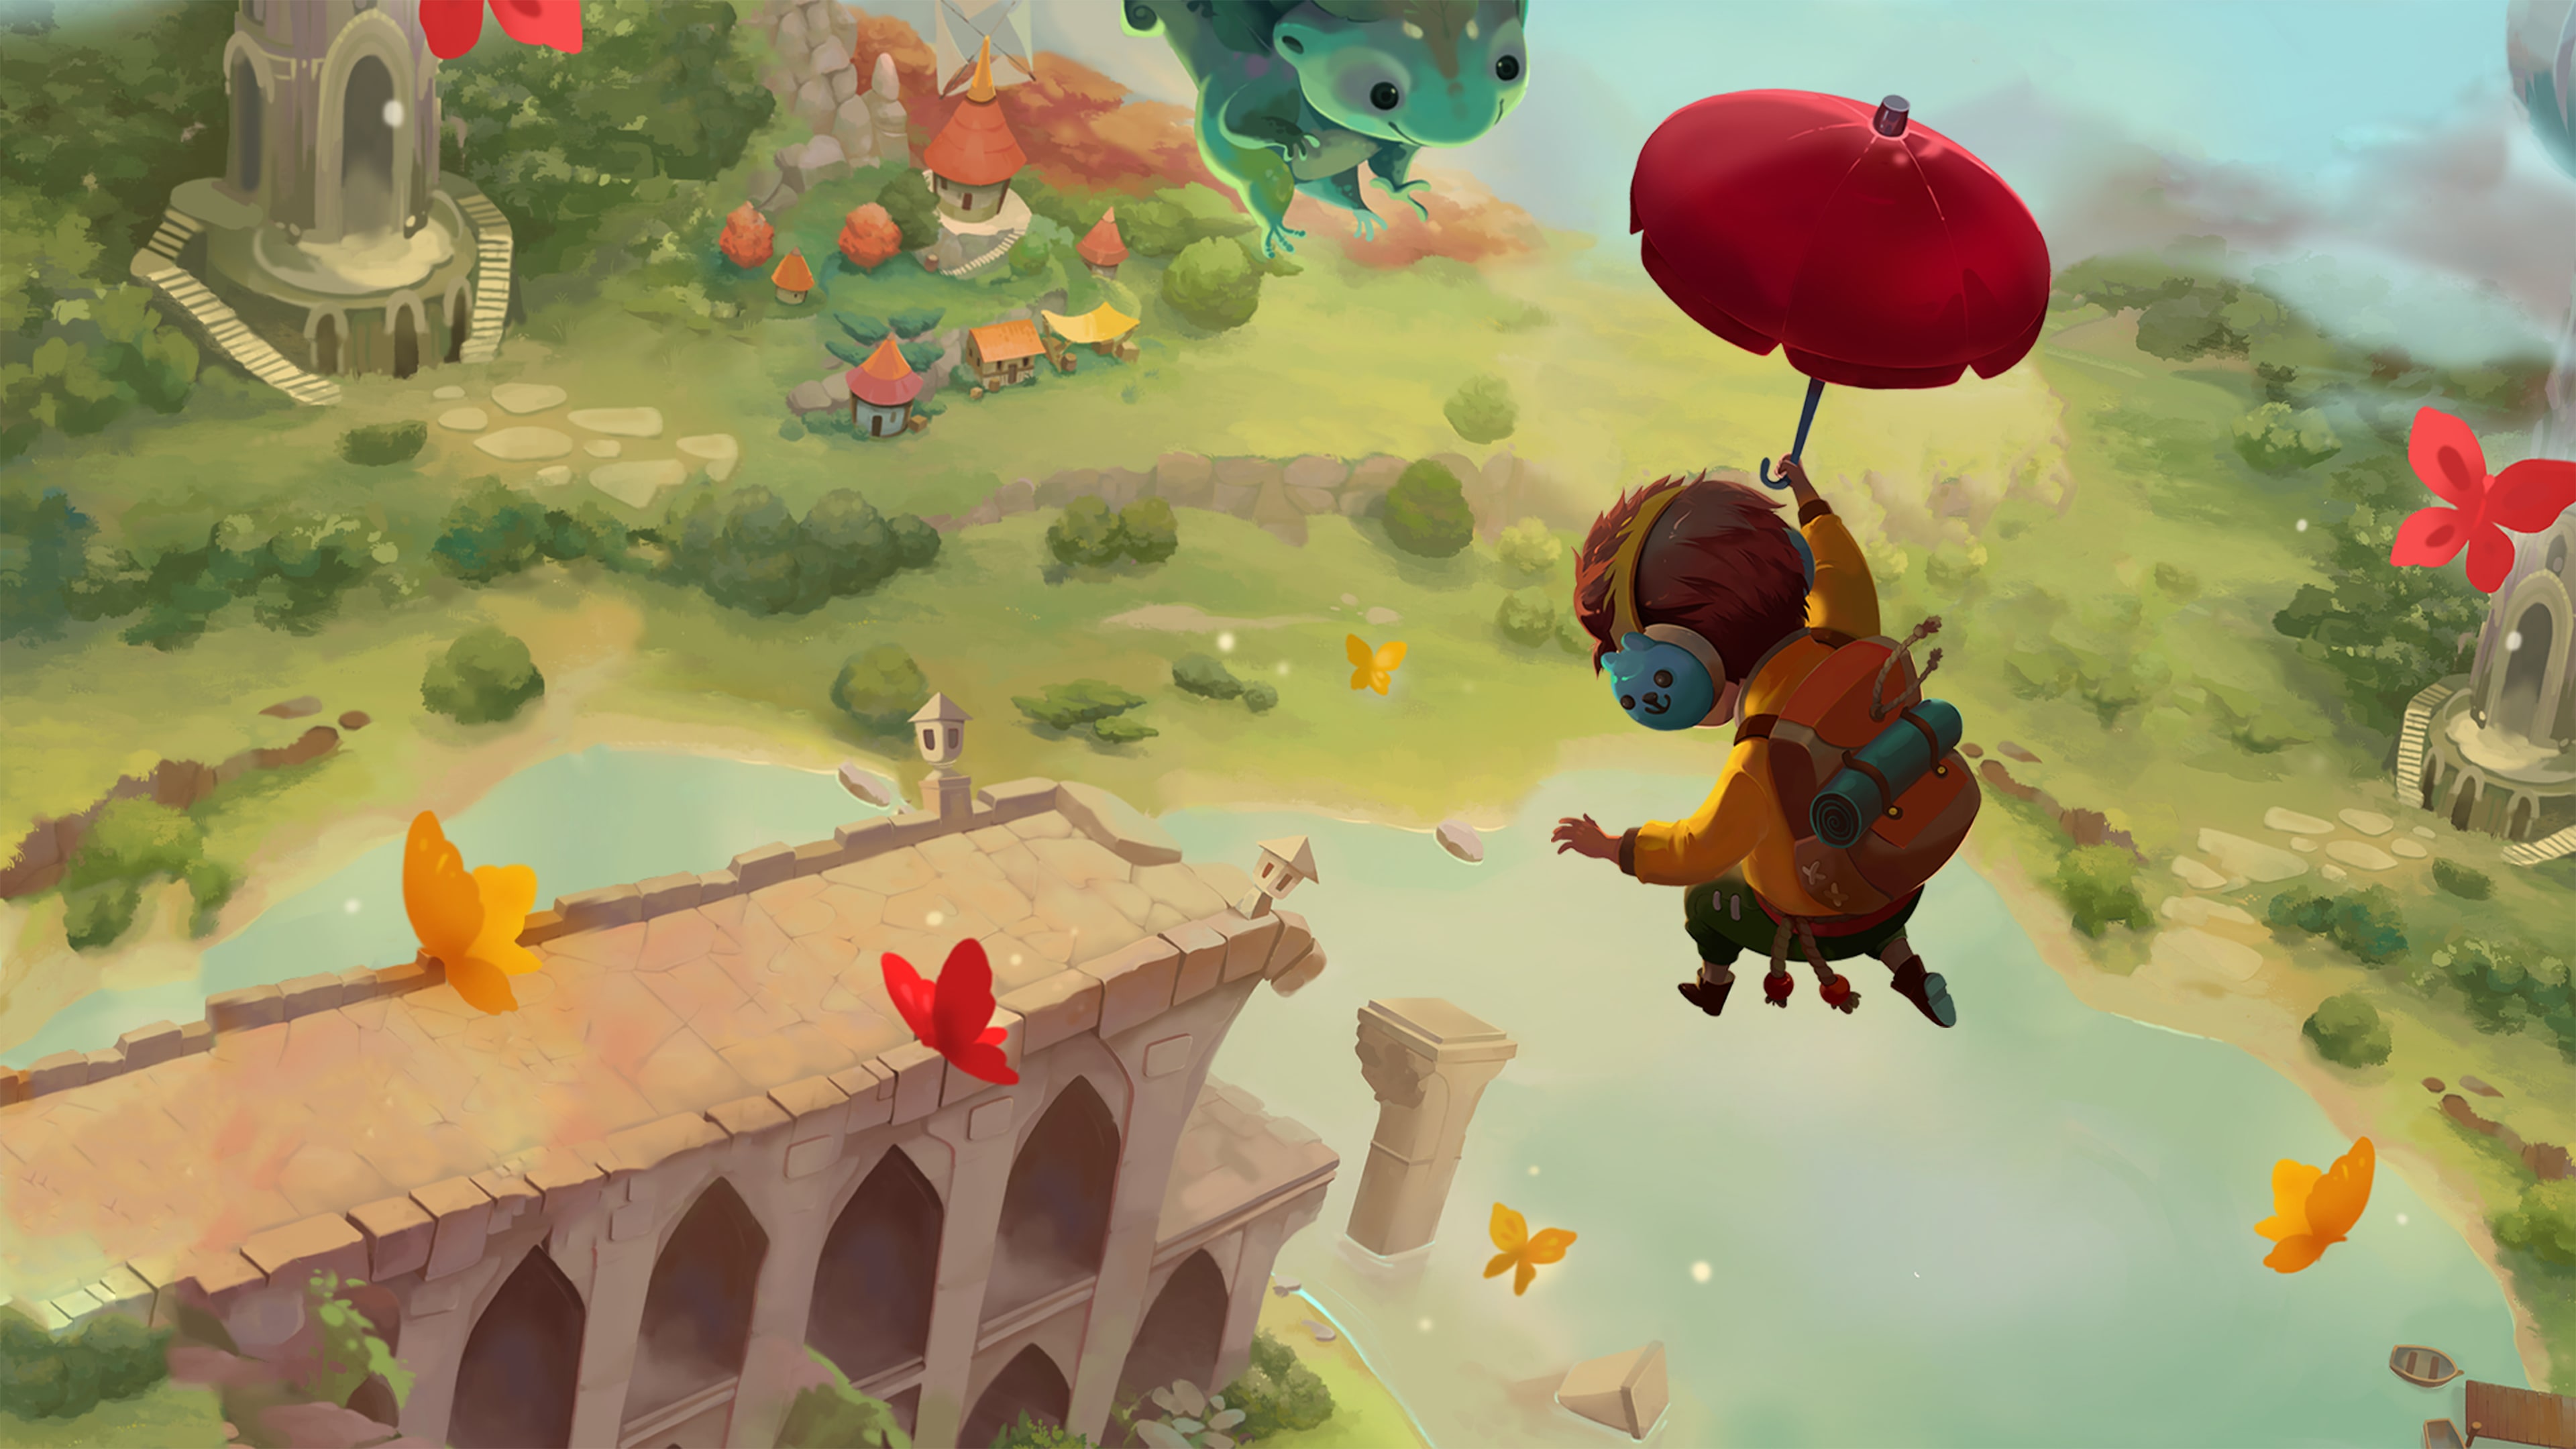 Yonder: The Catcher Chronicles